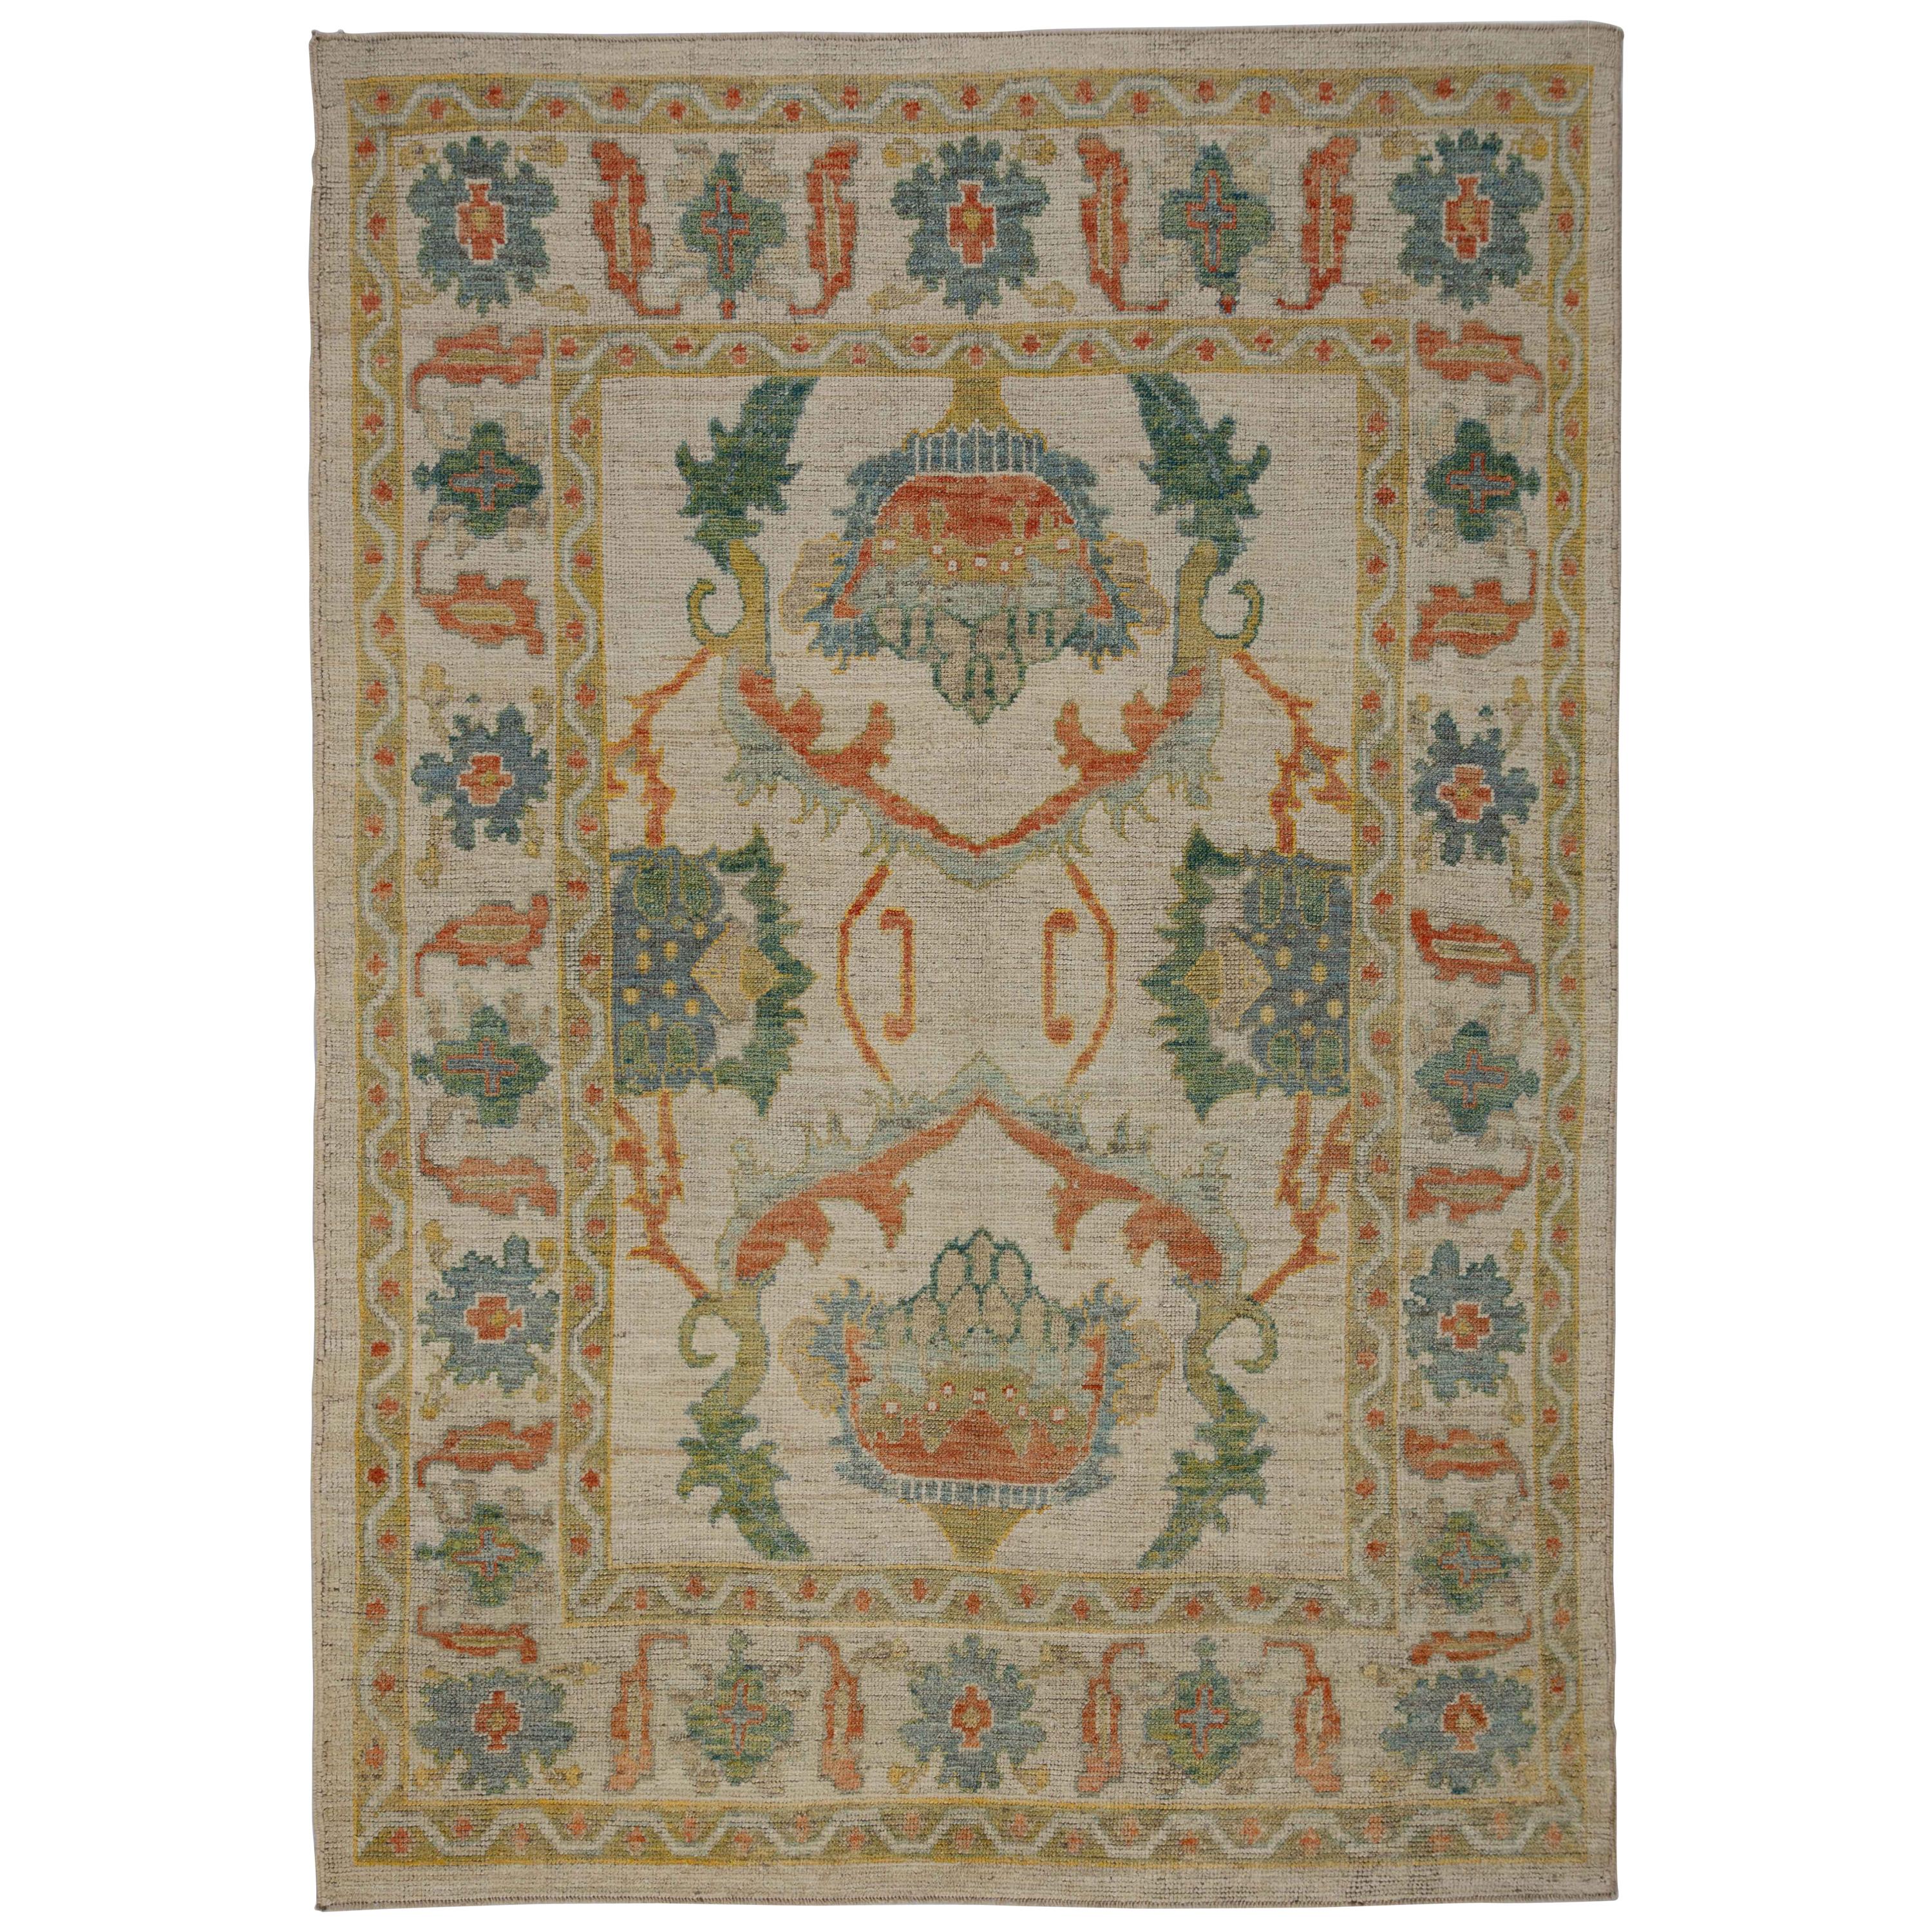 Modern Turkish Oushak Rug with Green and Rust Flower Patterns on Beige Field For Sale